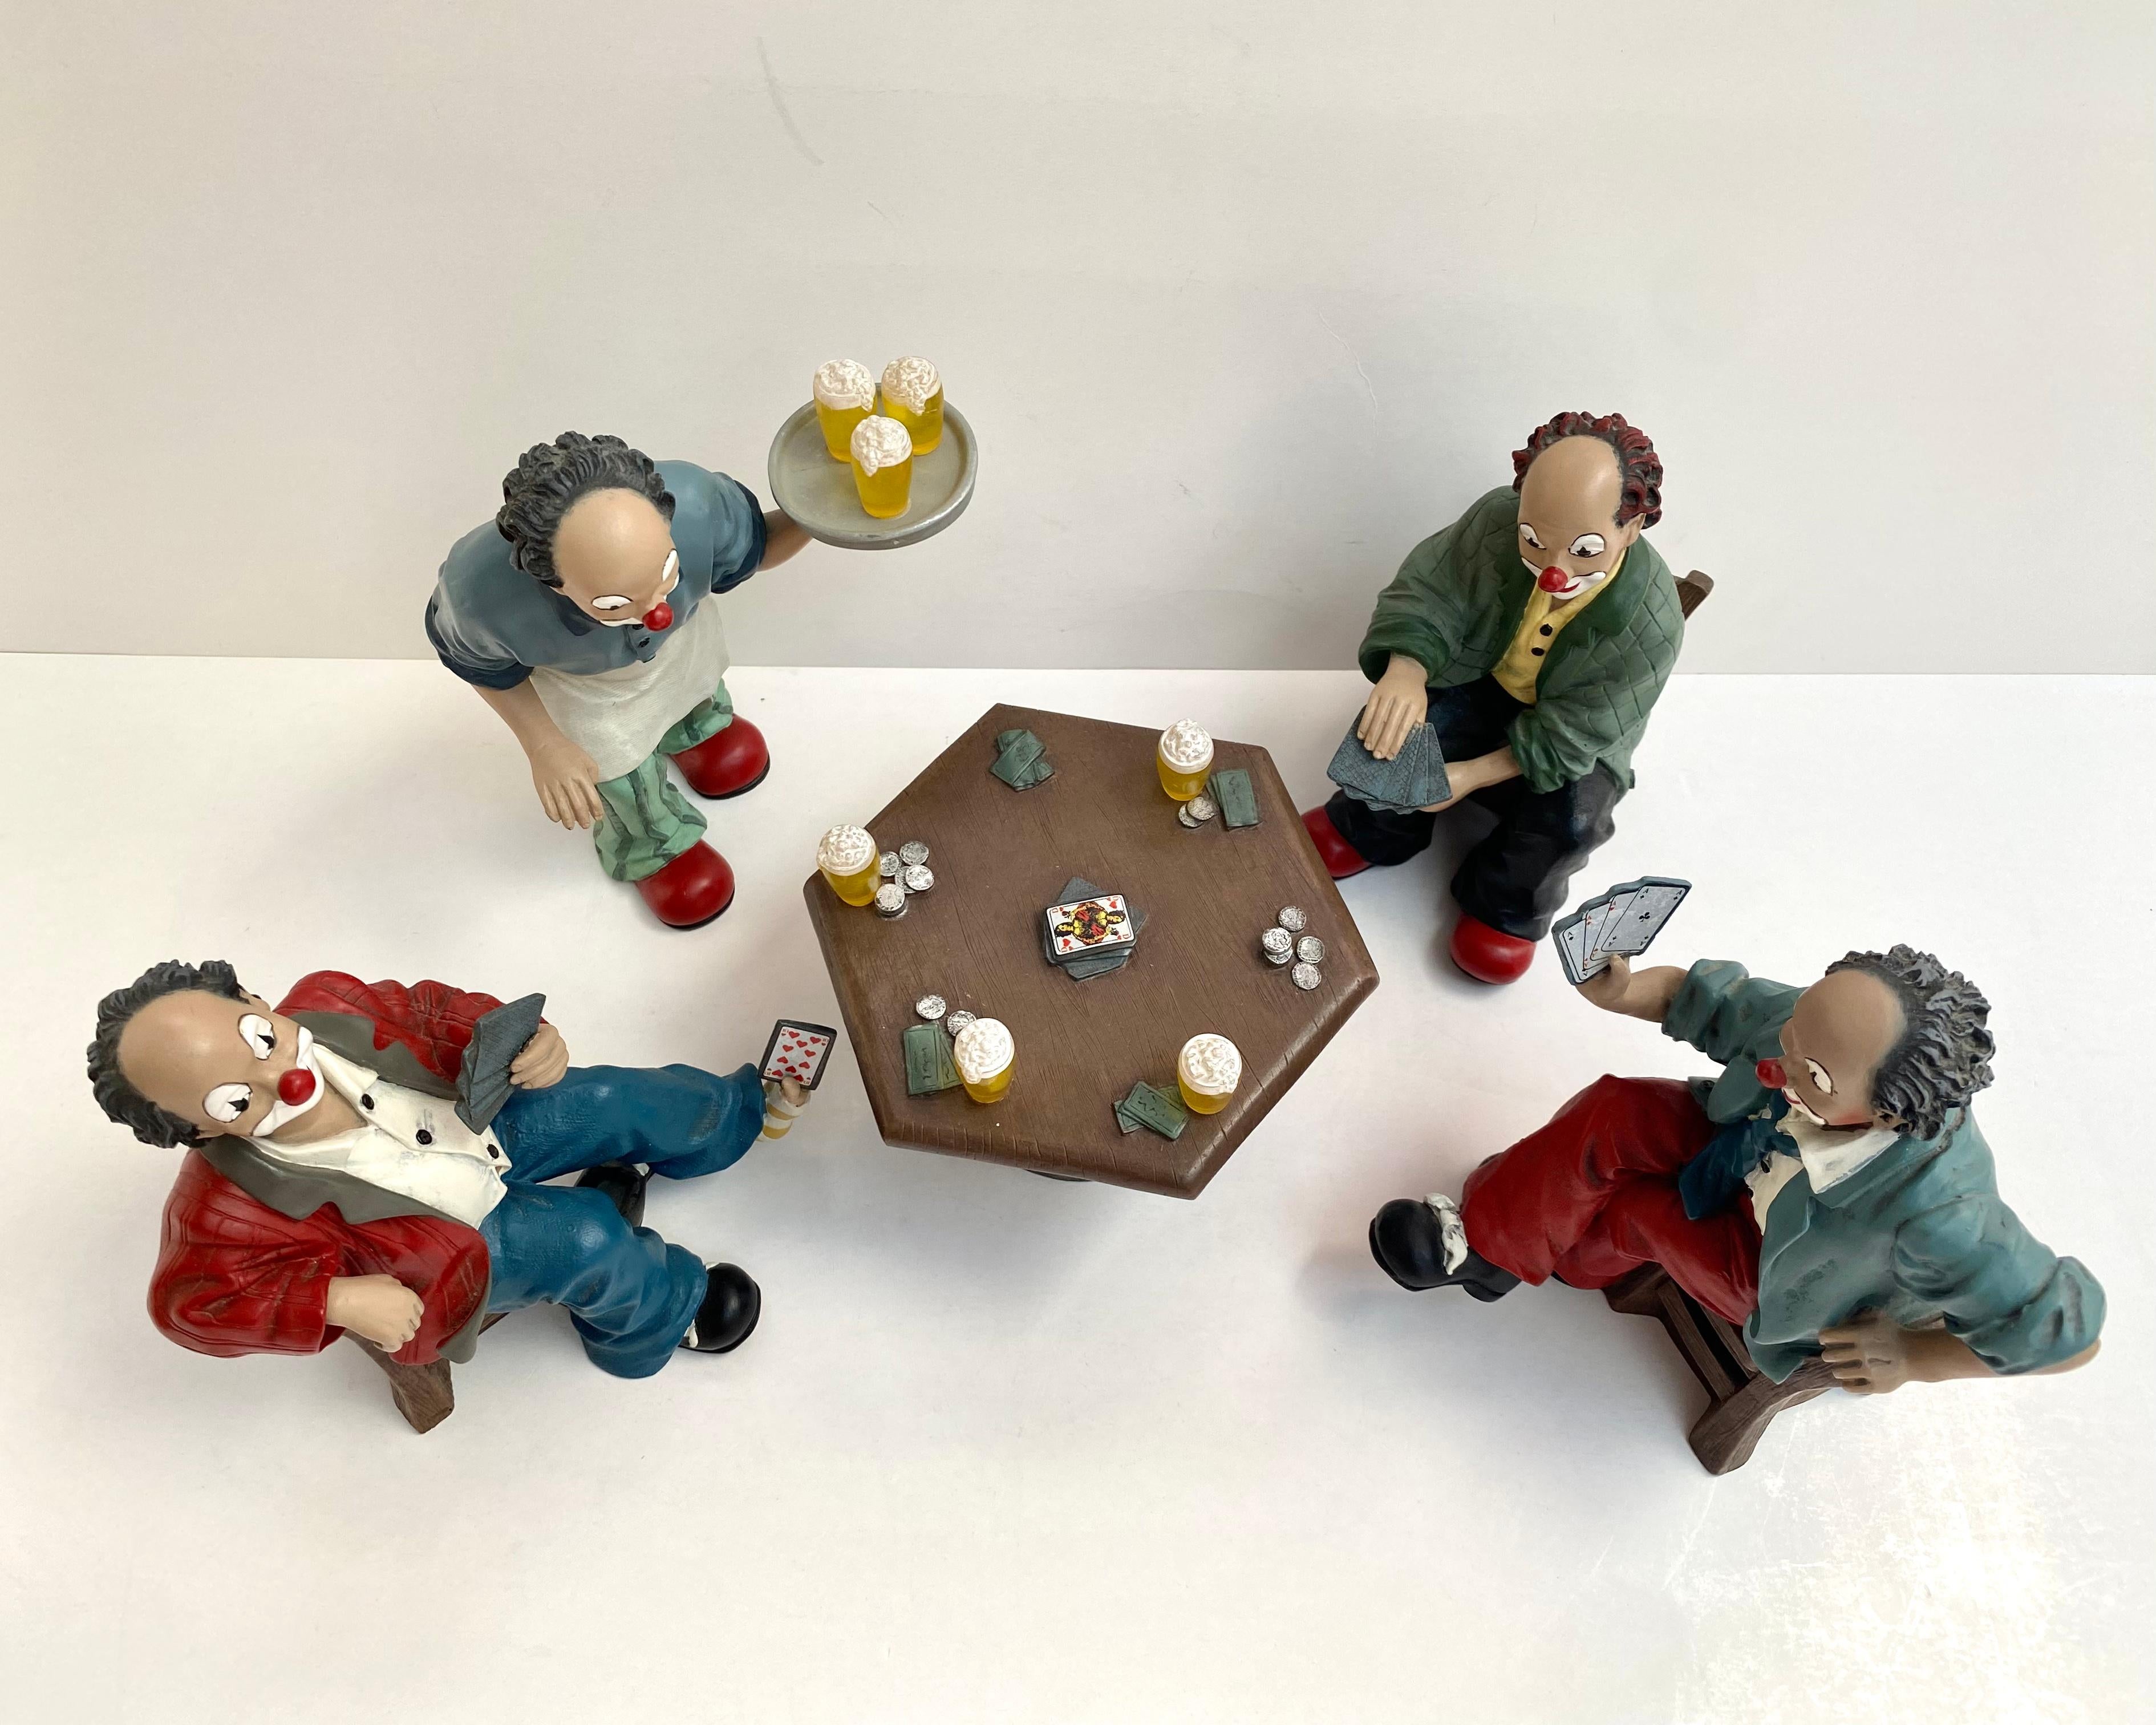 5 PIECE SET OF 4 HAND PAINTED CLOWNS SITTING AROUND TABLE PLAYING POKER - VERY DETAILED.

Gilde, Germany, 1990s.

Vintage 5 piece set of four clowns playing poker and a head waiter. They are all different. They are dressed in jeans, shirts and